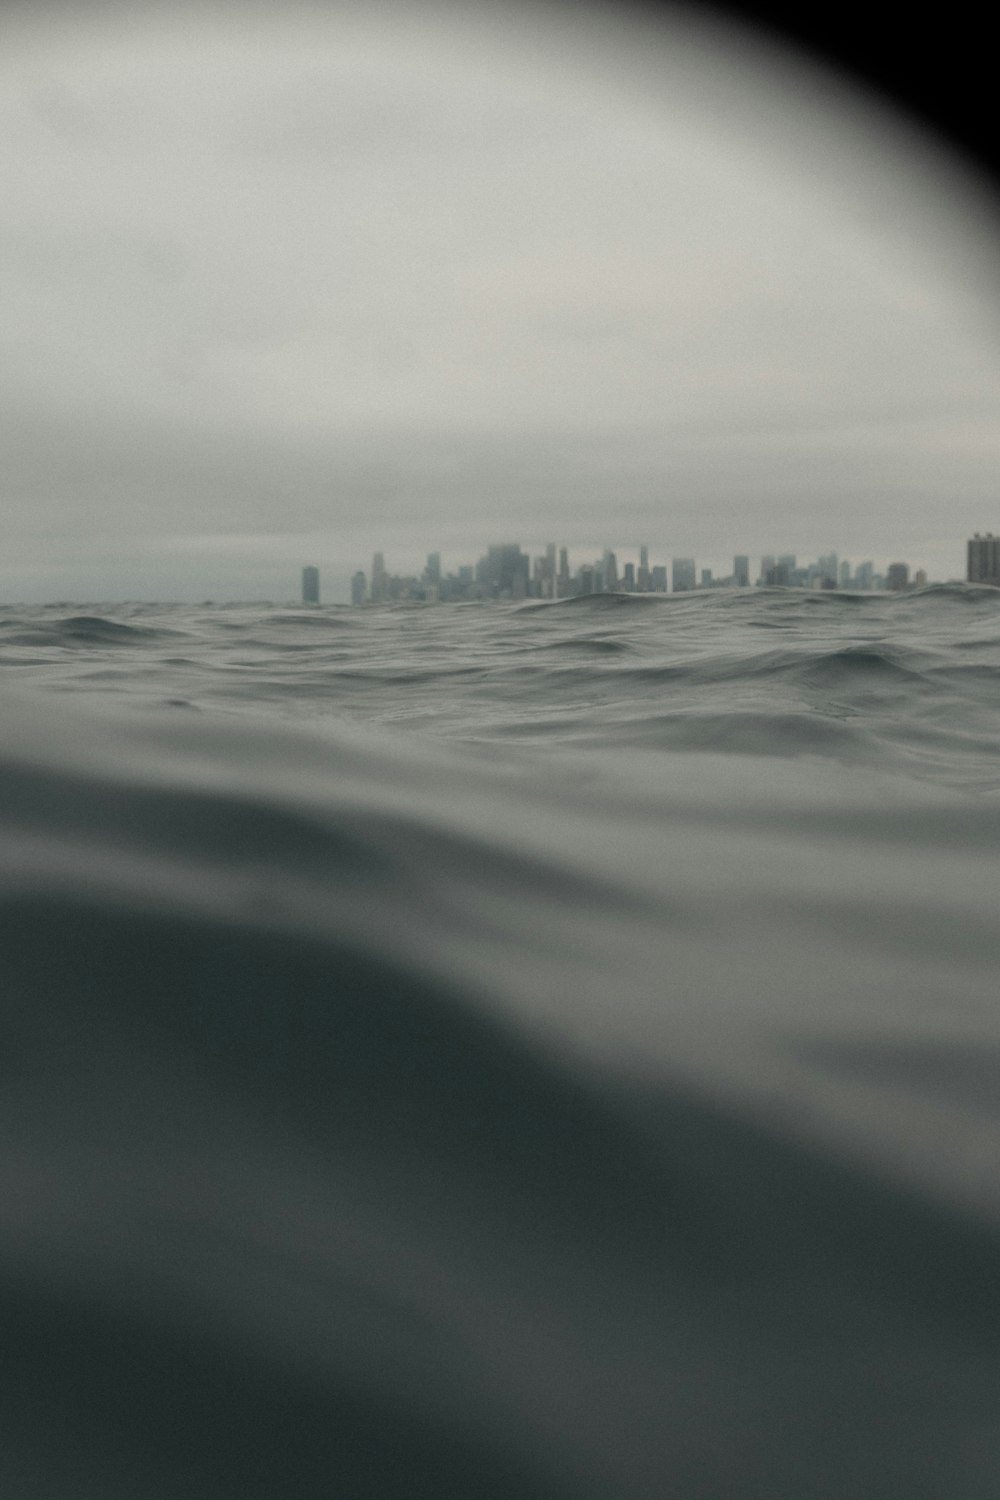 a view of a city from the ocean